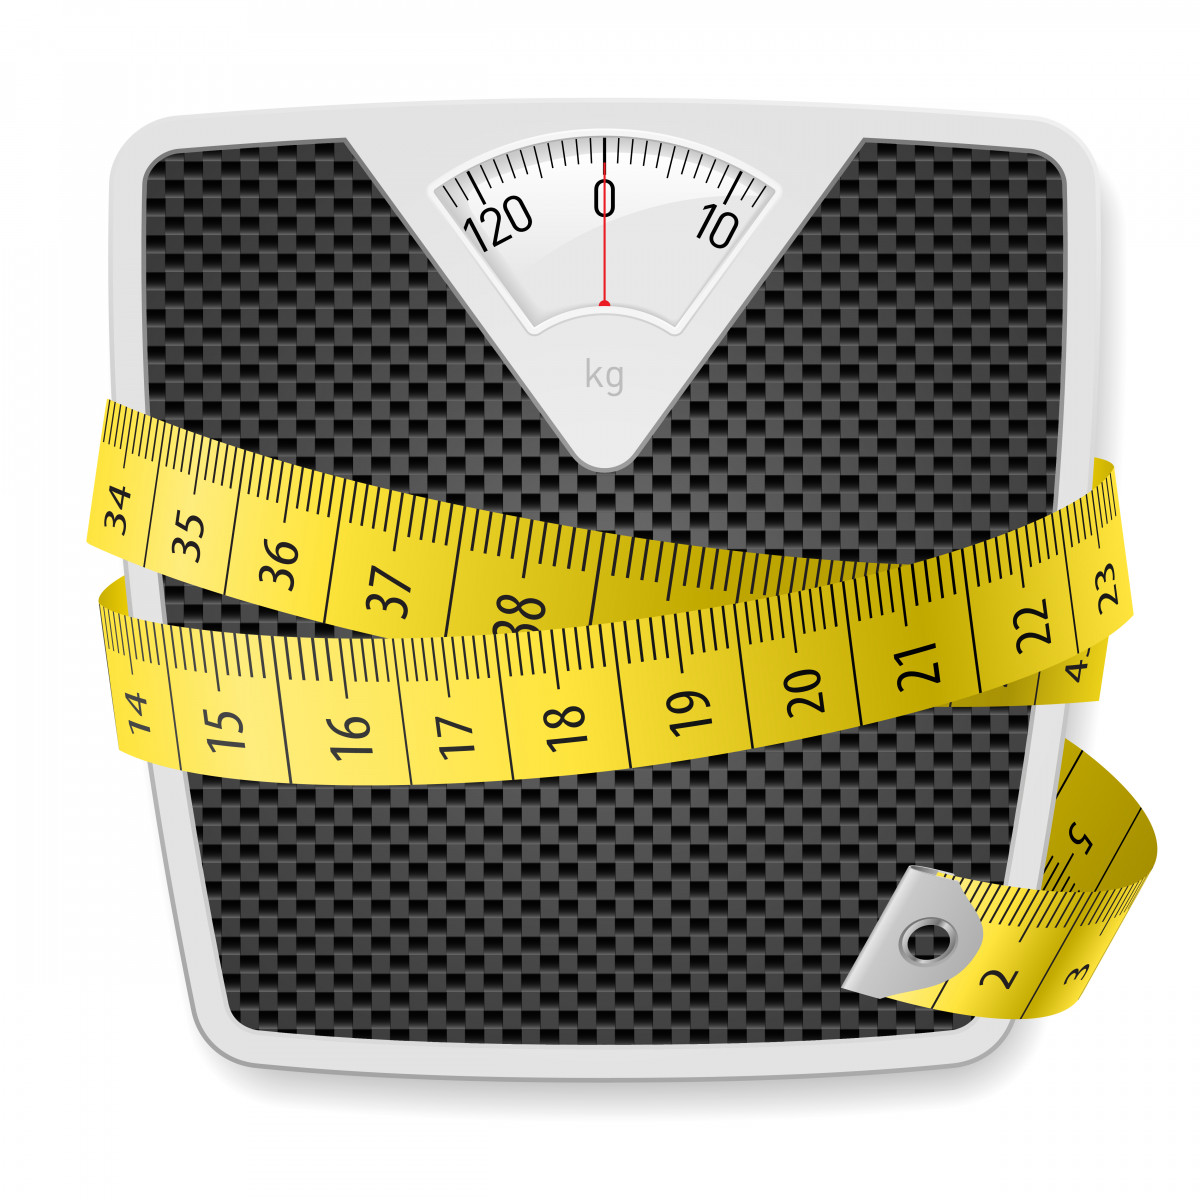 PHENTERMINE AND WELLBUTRIN TOGETHER FOR WEIGHT LOSS